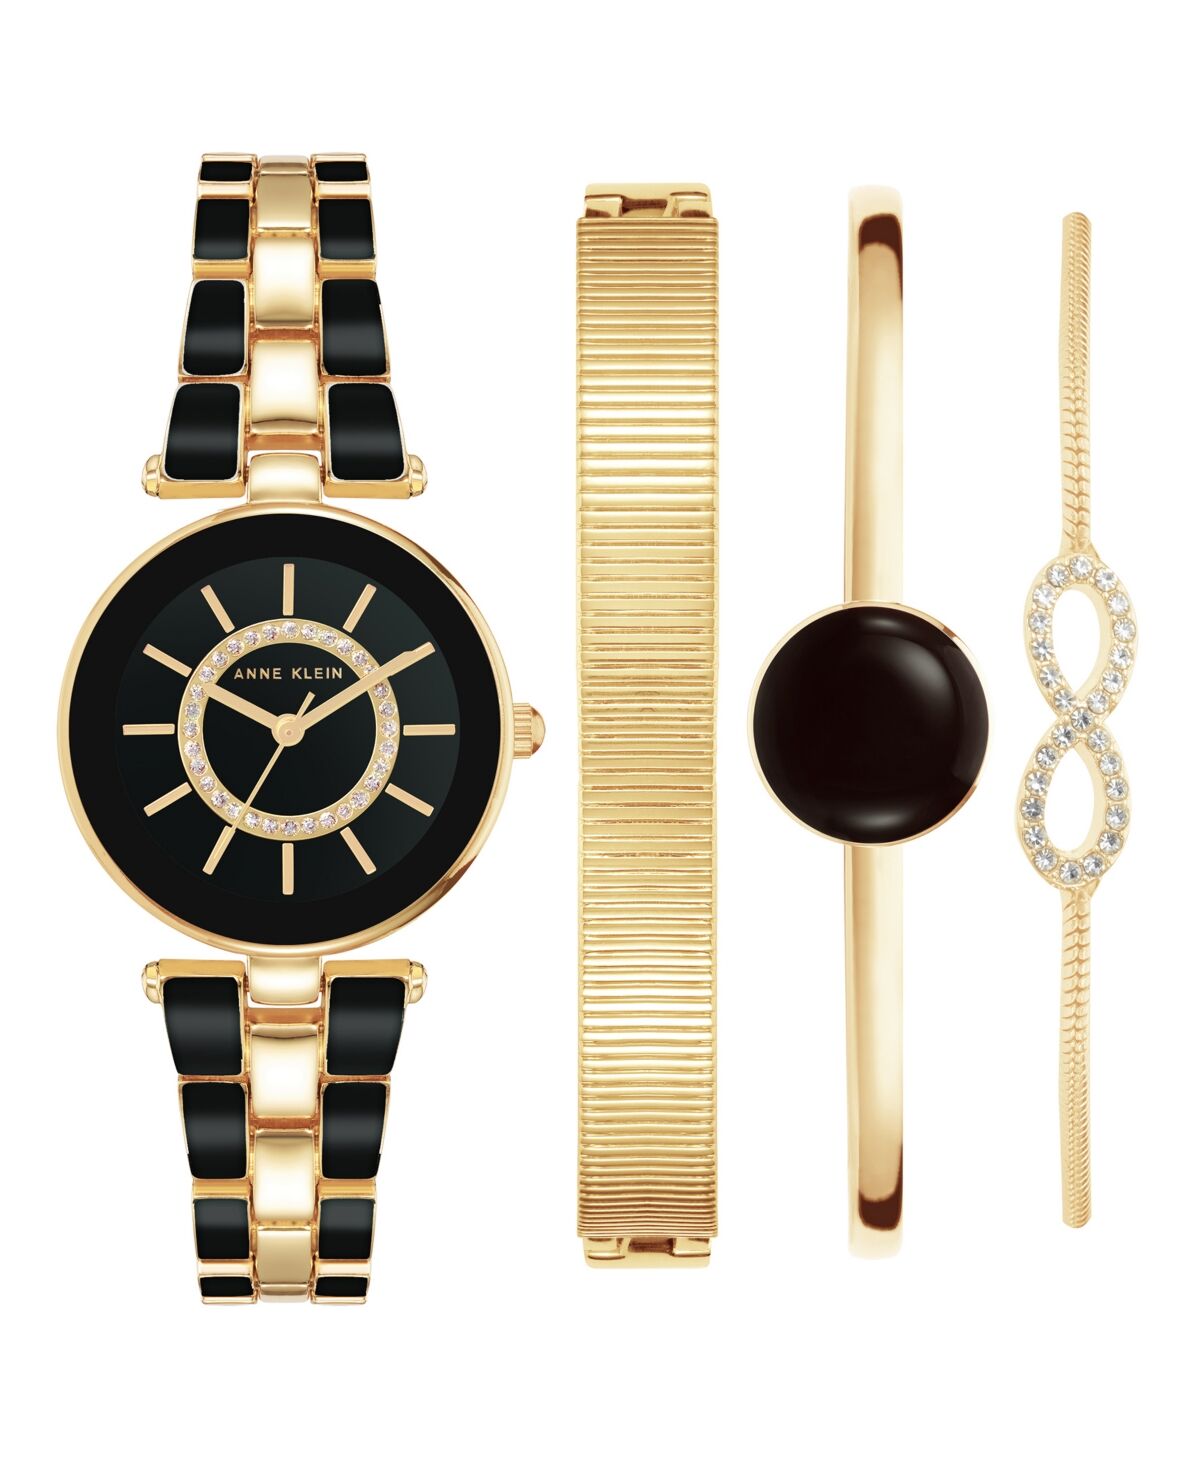 Anne Klein Women's Gold-Tone Alloy Bracelet with Black Enamel and Crystal Accents Fashion Watch 34mm Set 4 Pieces - Gold-Tone, Black